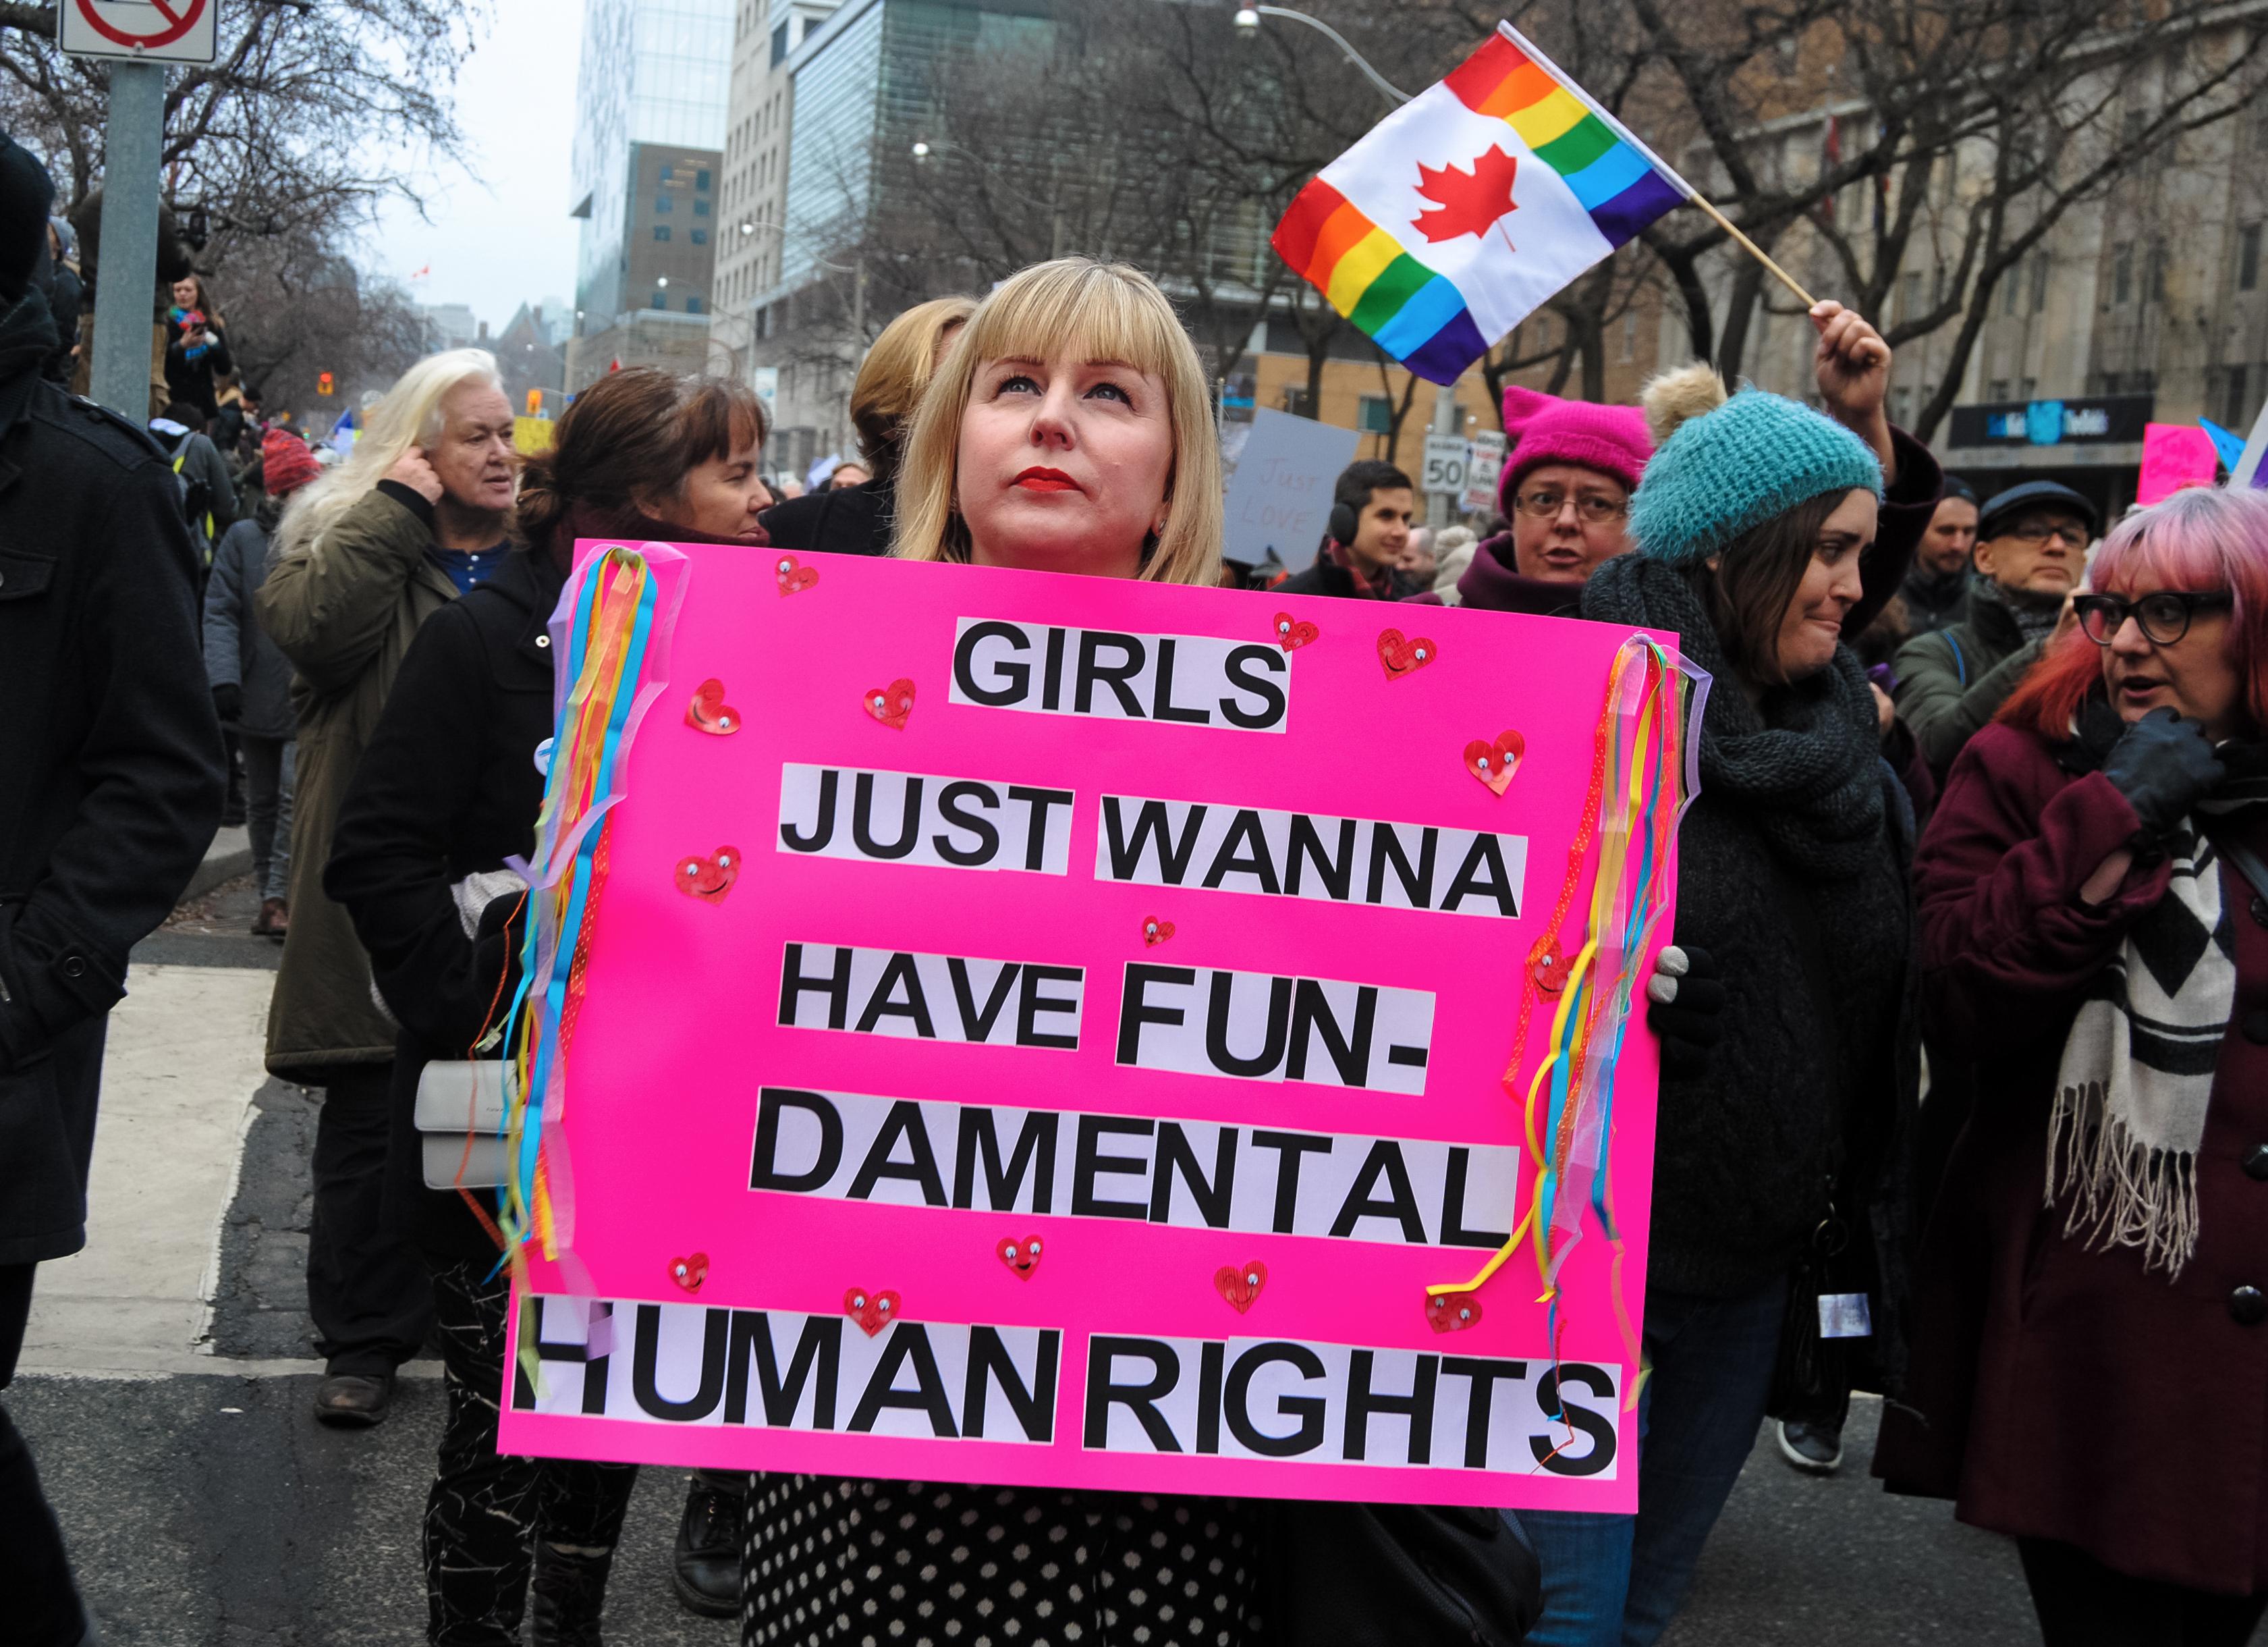 A woman holds a sign that reads "Woman just want to have fundamental human rights" at the Toronto Women's March in 2017.